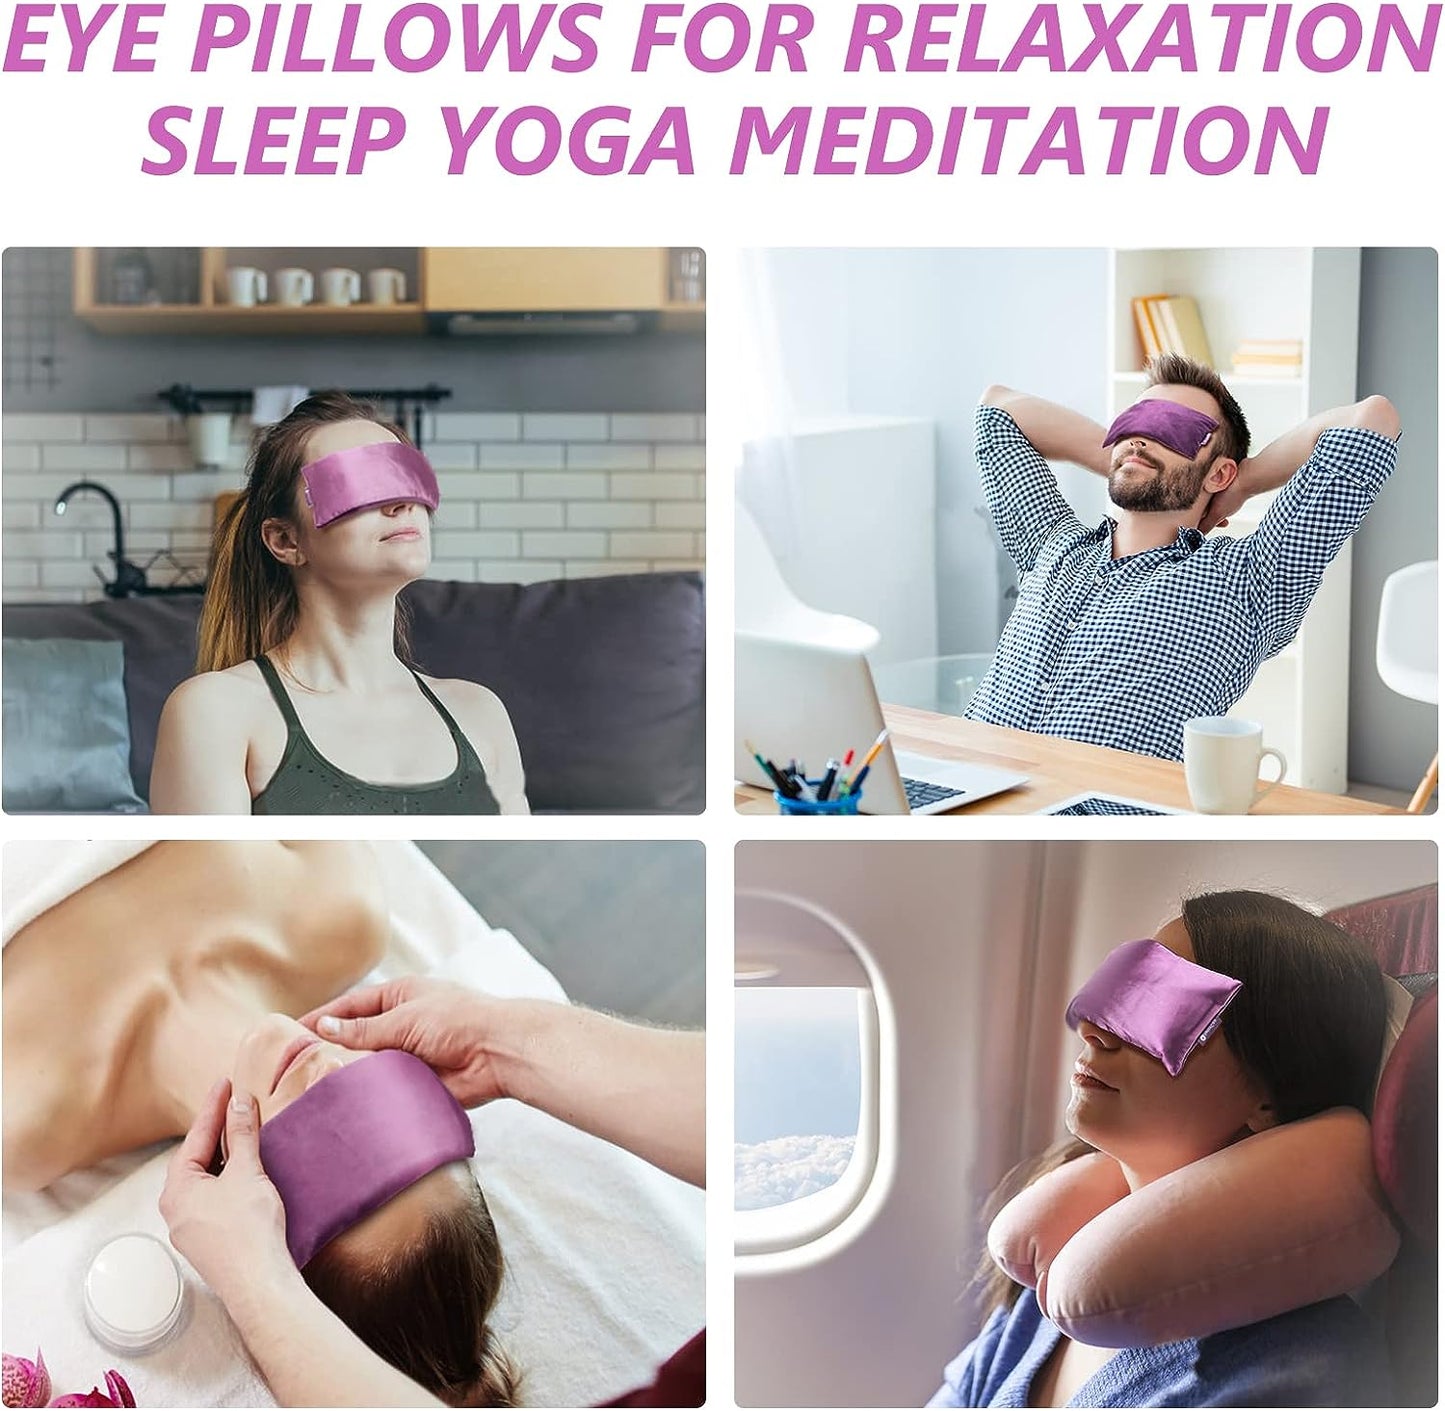 Lavender Eye Pillow for Relaxation, Yoga, Sleeping, Weighted Eye Mask Heated for Headache, Sinus, Dry Eyes Relief, Moist Heat Eye Compress, Meditation Accessories with Aromatherapy, Pack of 2